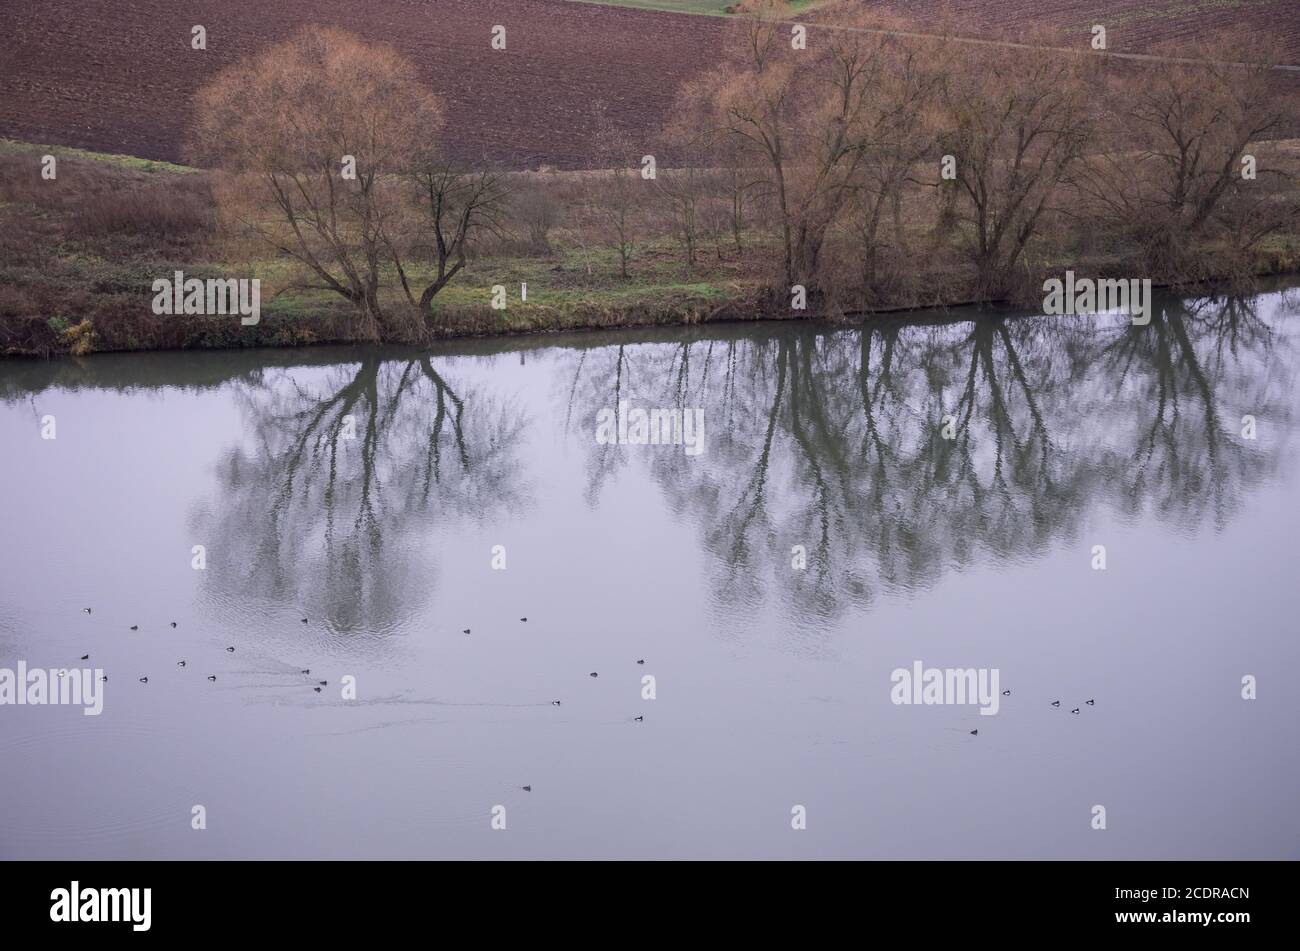 Late autumn melancholy scenery with river landscape and water fowl. Stock Photo